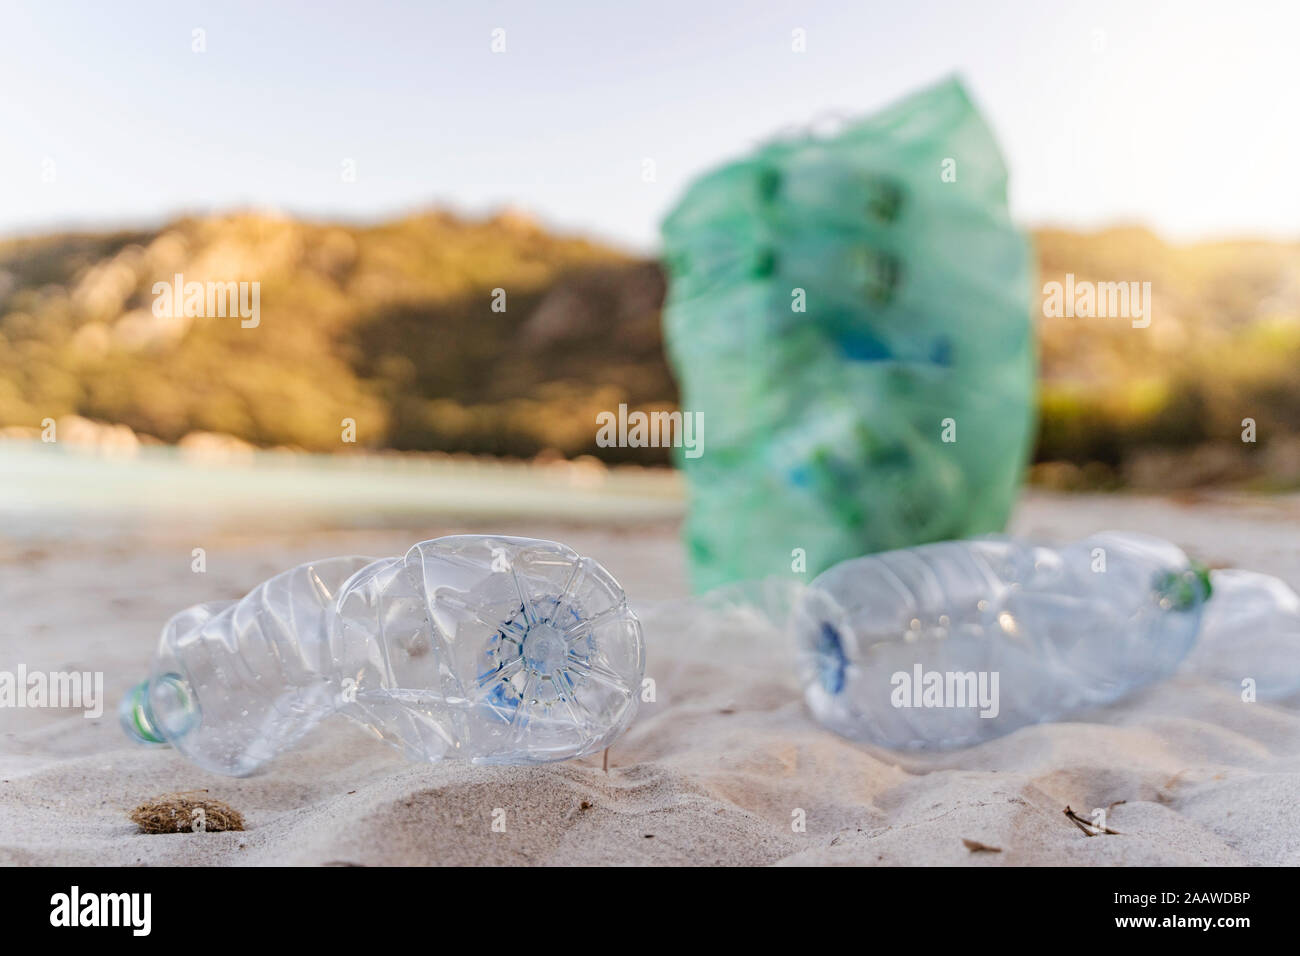 Empty plastic bottles and garbage bin full of collected plastic bottles on the beach Stock Photo